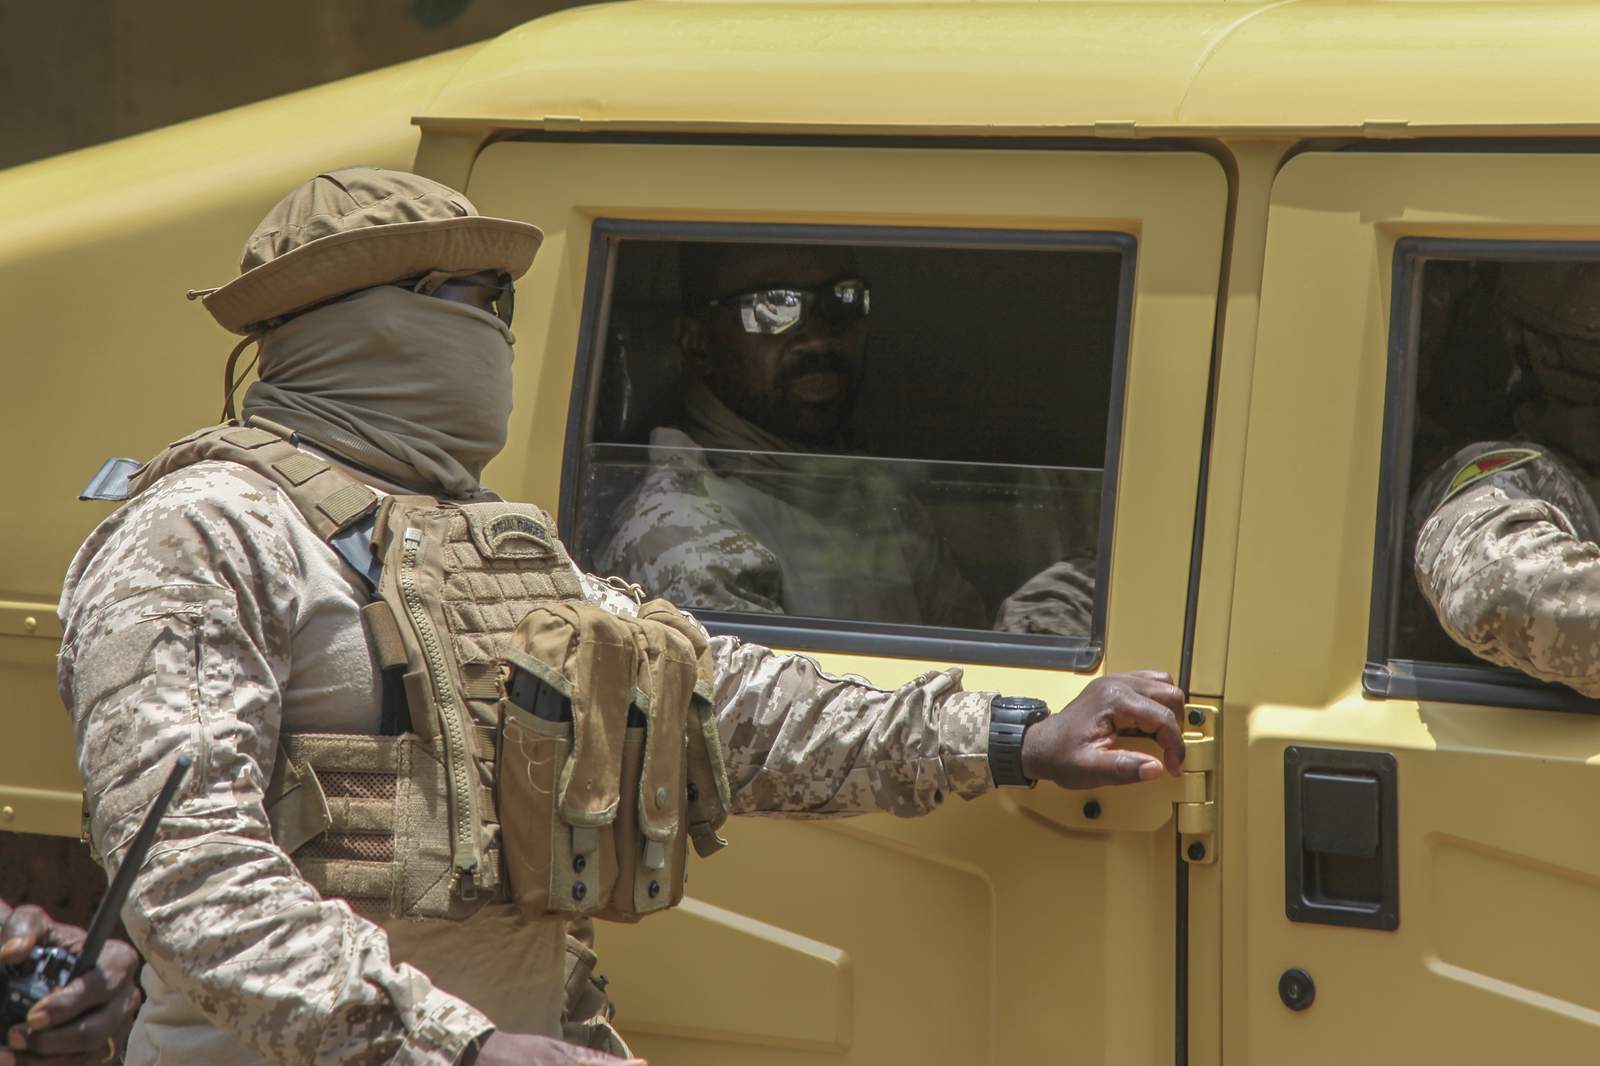 Group of French-speaking countries suspends Mali after coup